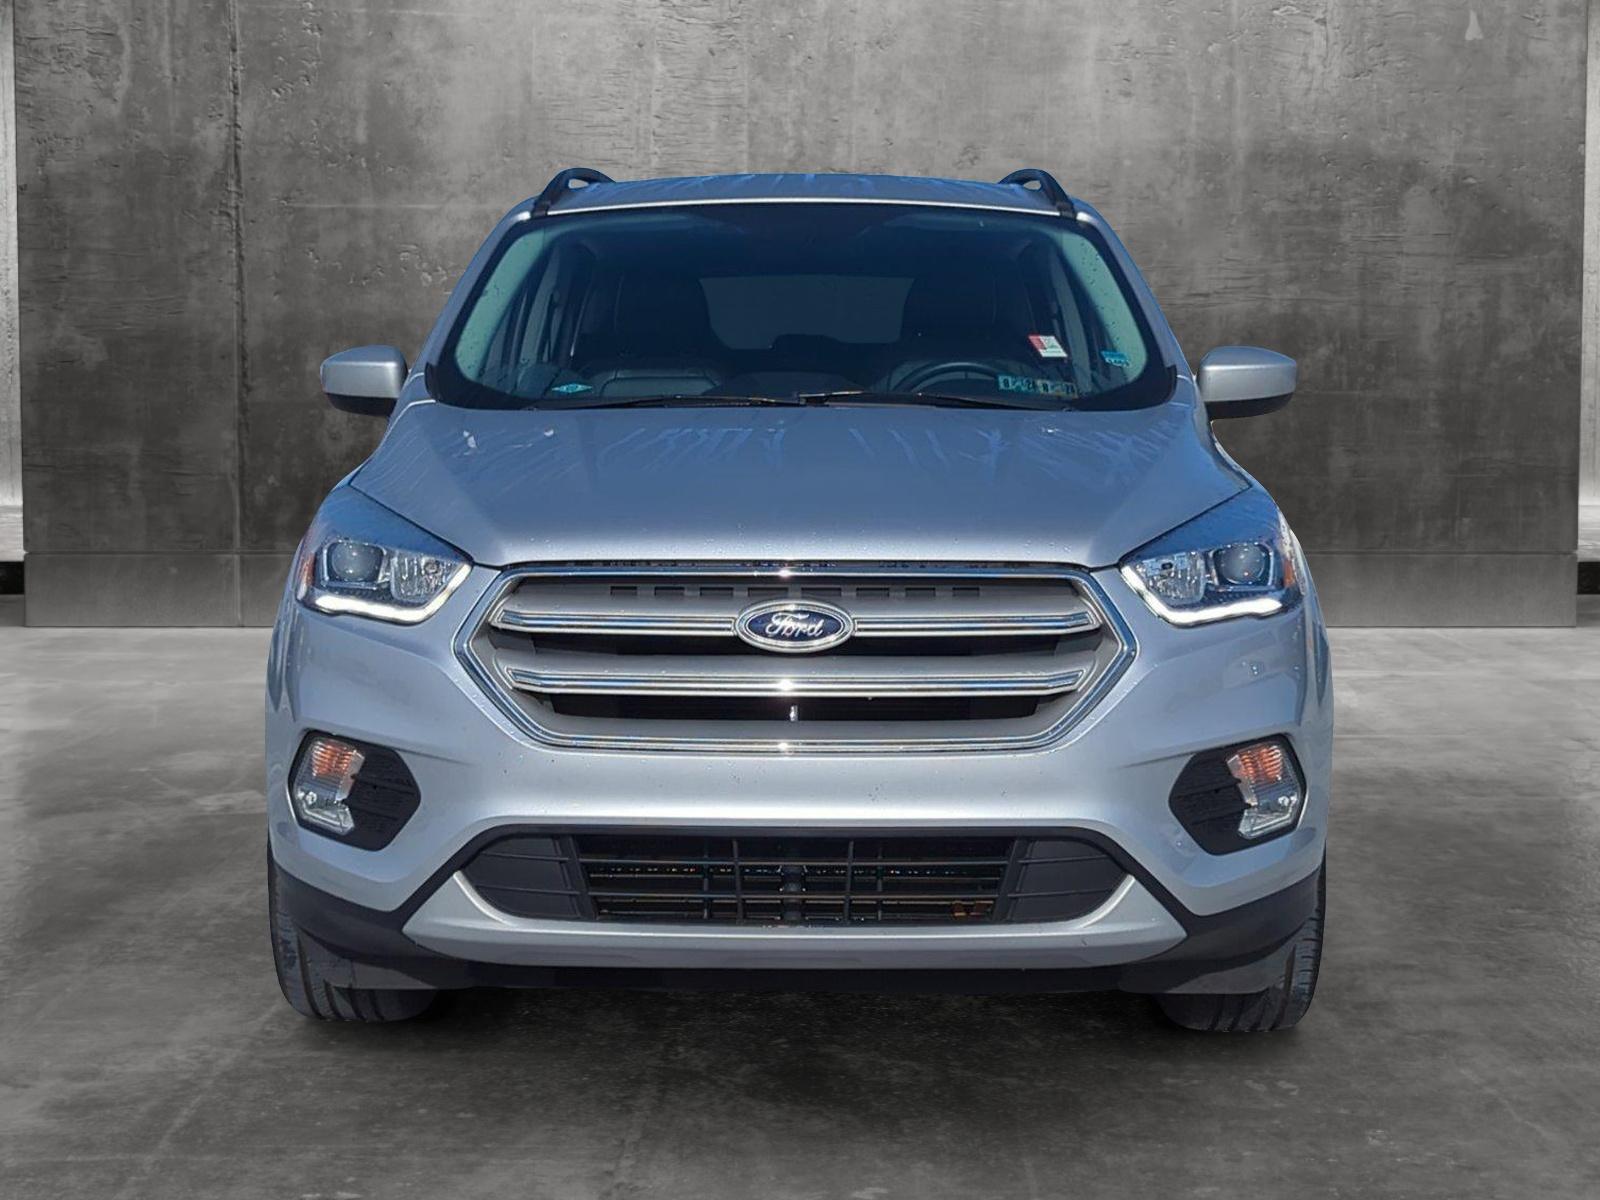 2018 Ford Escape Vehicle Photo in Ft. Myers, FL 33907